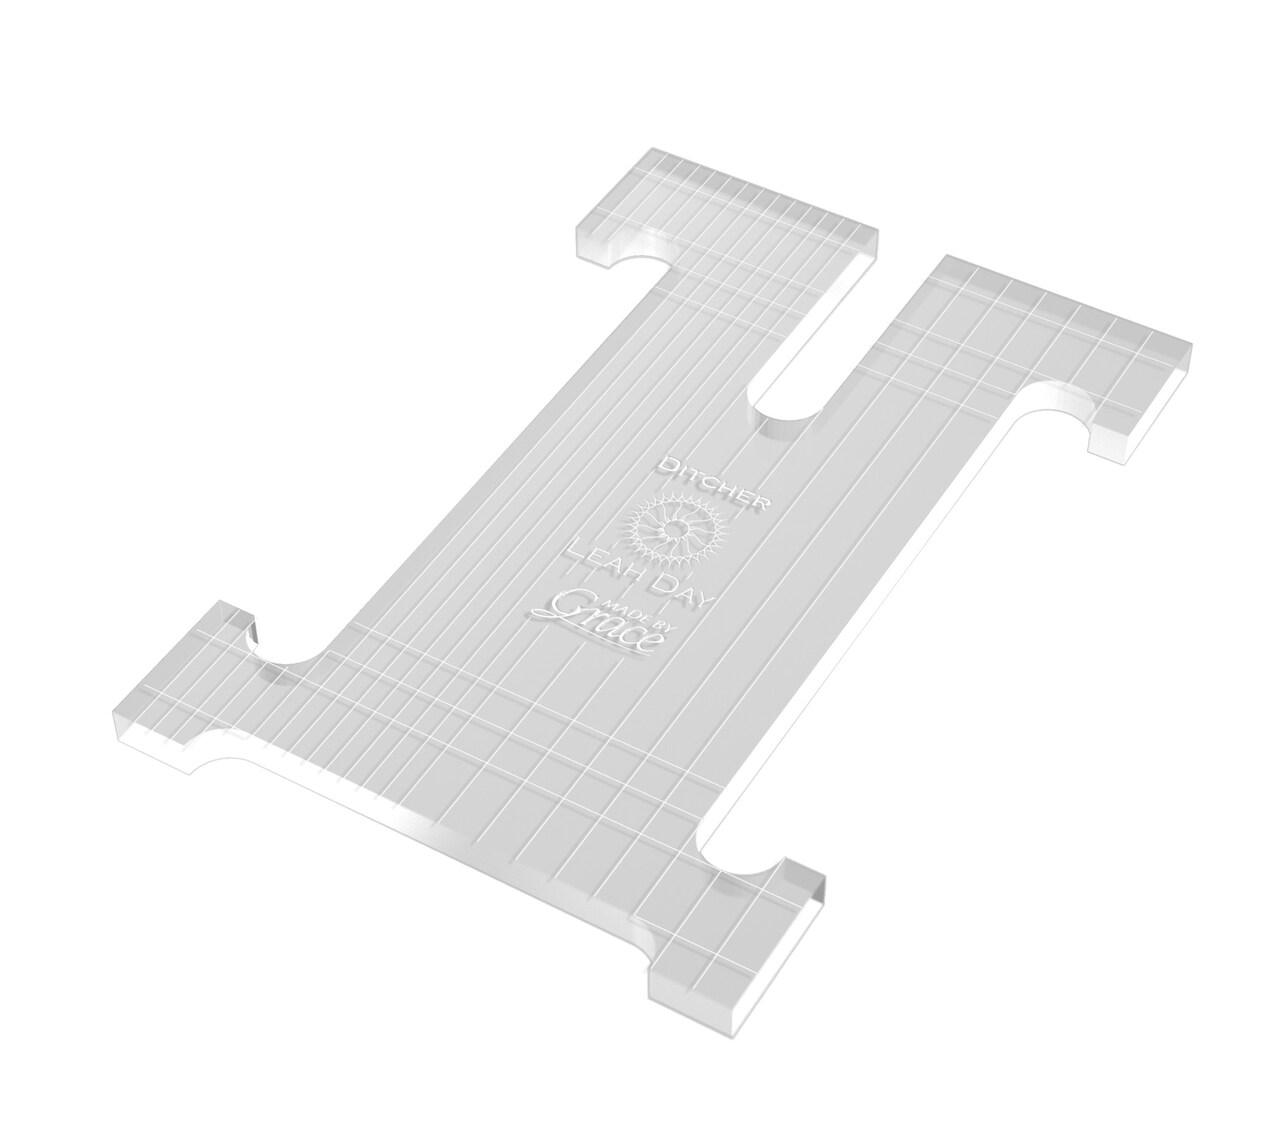 Quilting Ruler Template